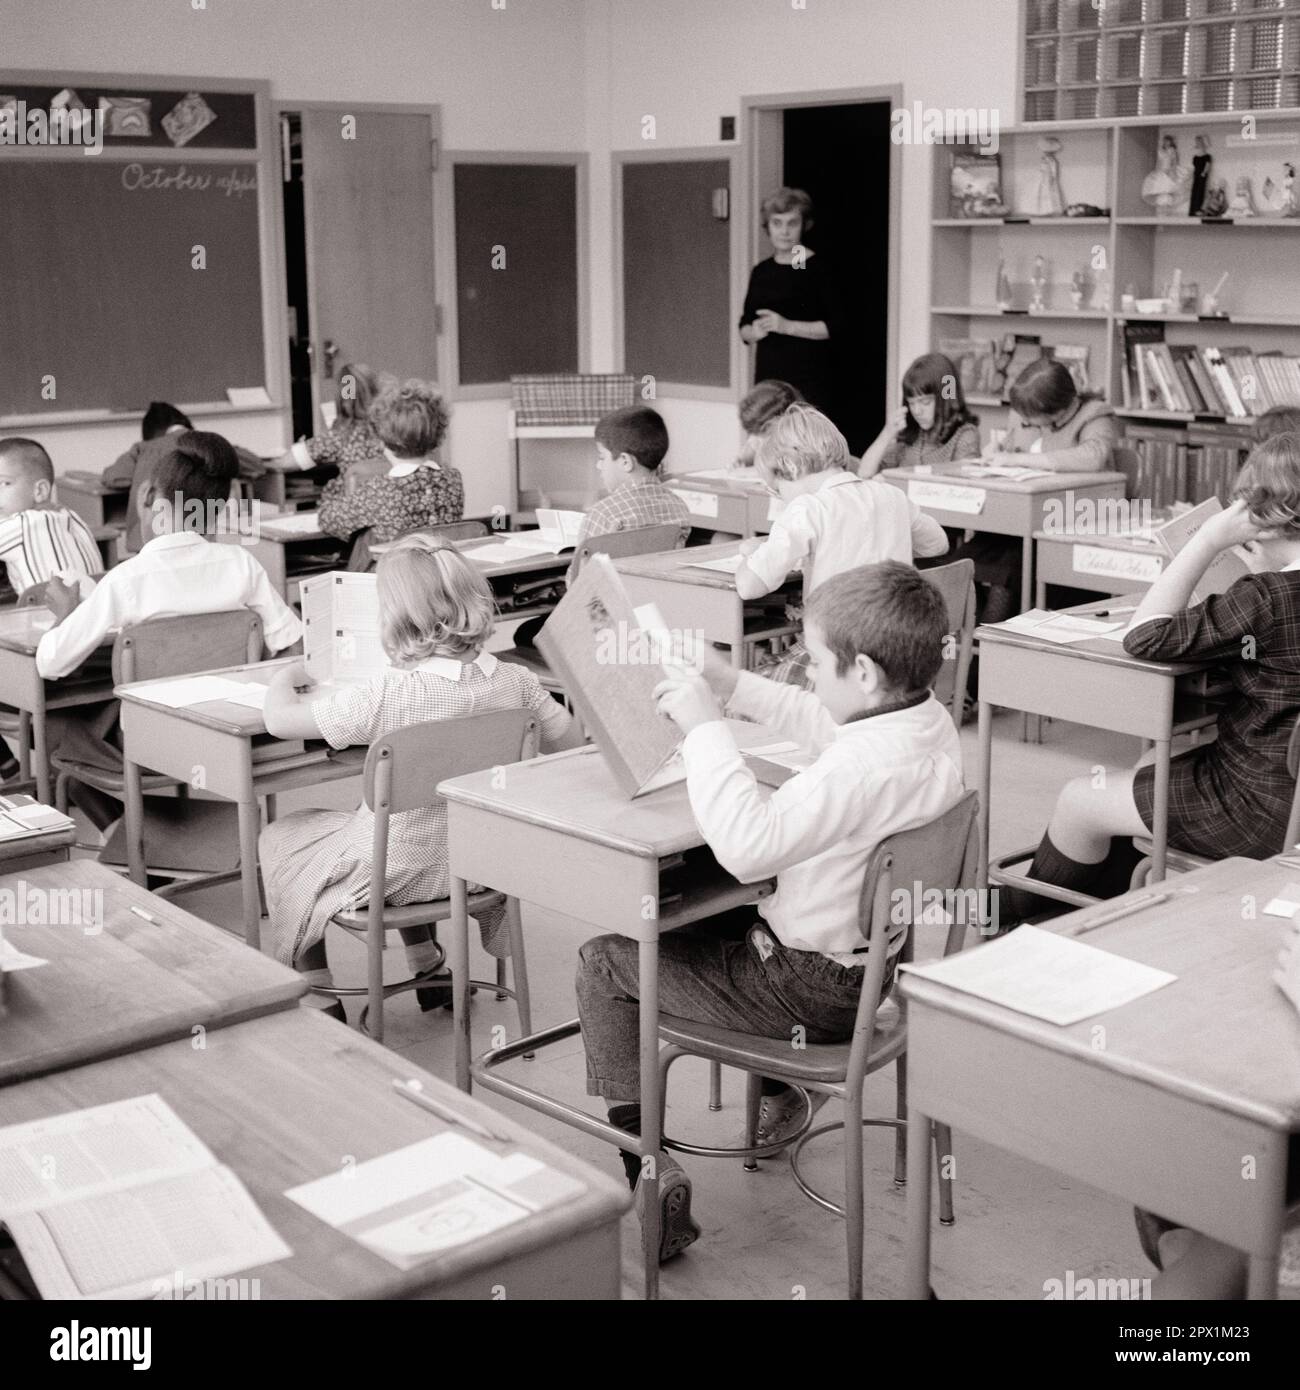 1960s TEACHER STANDING IN DOORWAY TO CLASSROOM MONITORING STUDENTS READING AND STUDYING AT THEIR DESKS - s15909 HAR001 HARS COPY SPACE HALF-LENGTH LADIES PERSONS MALES MIDDLE-AGED B&W DESKS SCHOOLS GRADE MIDDLE-AGED WOMAN HIGH ANGLE AFRICAN-AMERICANS AFRICAN-AMERICAN AND INSTRUCTOR BLACK ETHNICITY REAR VIEW OCCUPATIONS PRIMARY FROM BEHIND EDUCATOR MONITORING BACK VIEW EDUCATING EDUCATORS GRADE SCHOOL INSTRUCTORS MID-ADULT MID-ADULT WOMAN SCHOOL TEACHES BLACK AND WHITE CAUCASIAN ETHNICITY HAR001 OLD FASHIONED AFRICAN AMERICANS Stock Photo